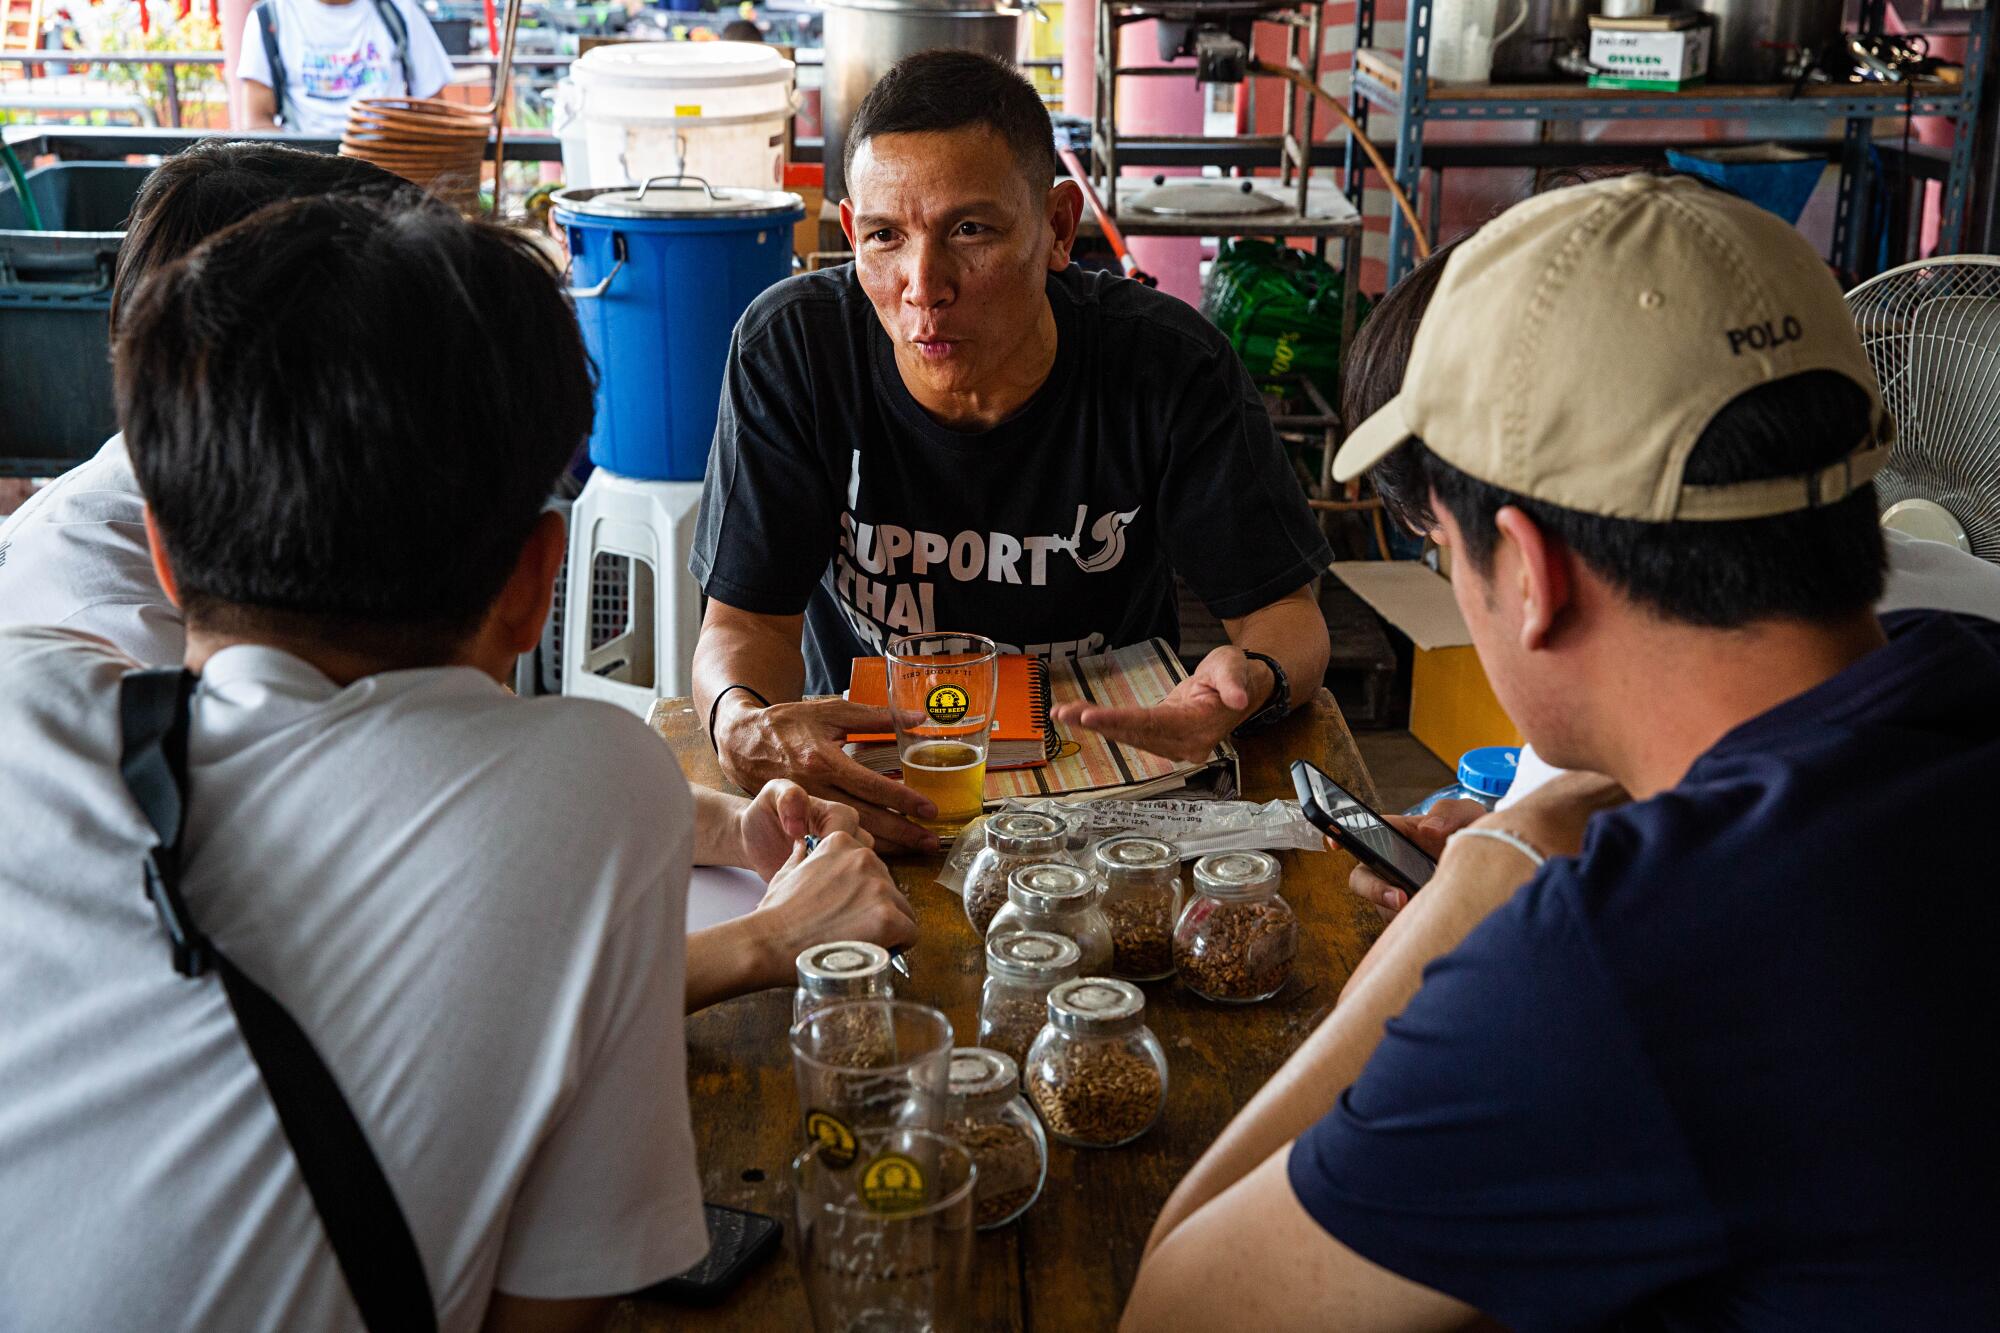 Wichit "Chit" Saiklao conducts a beer-brewing class in February 2020 in Thailand.